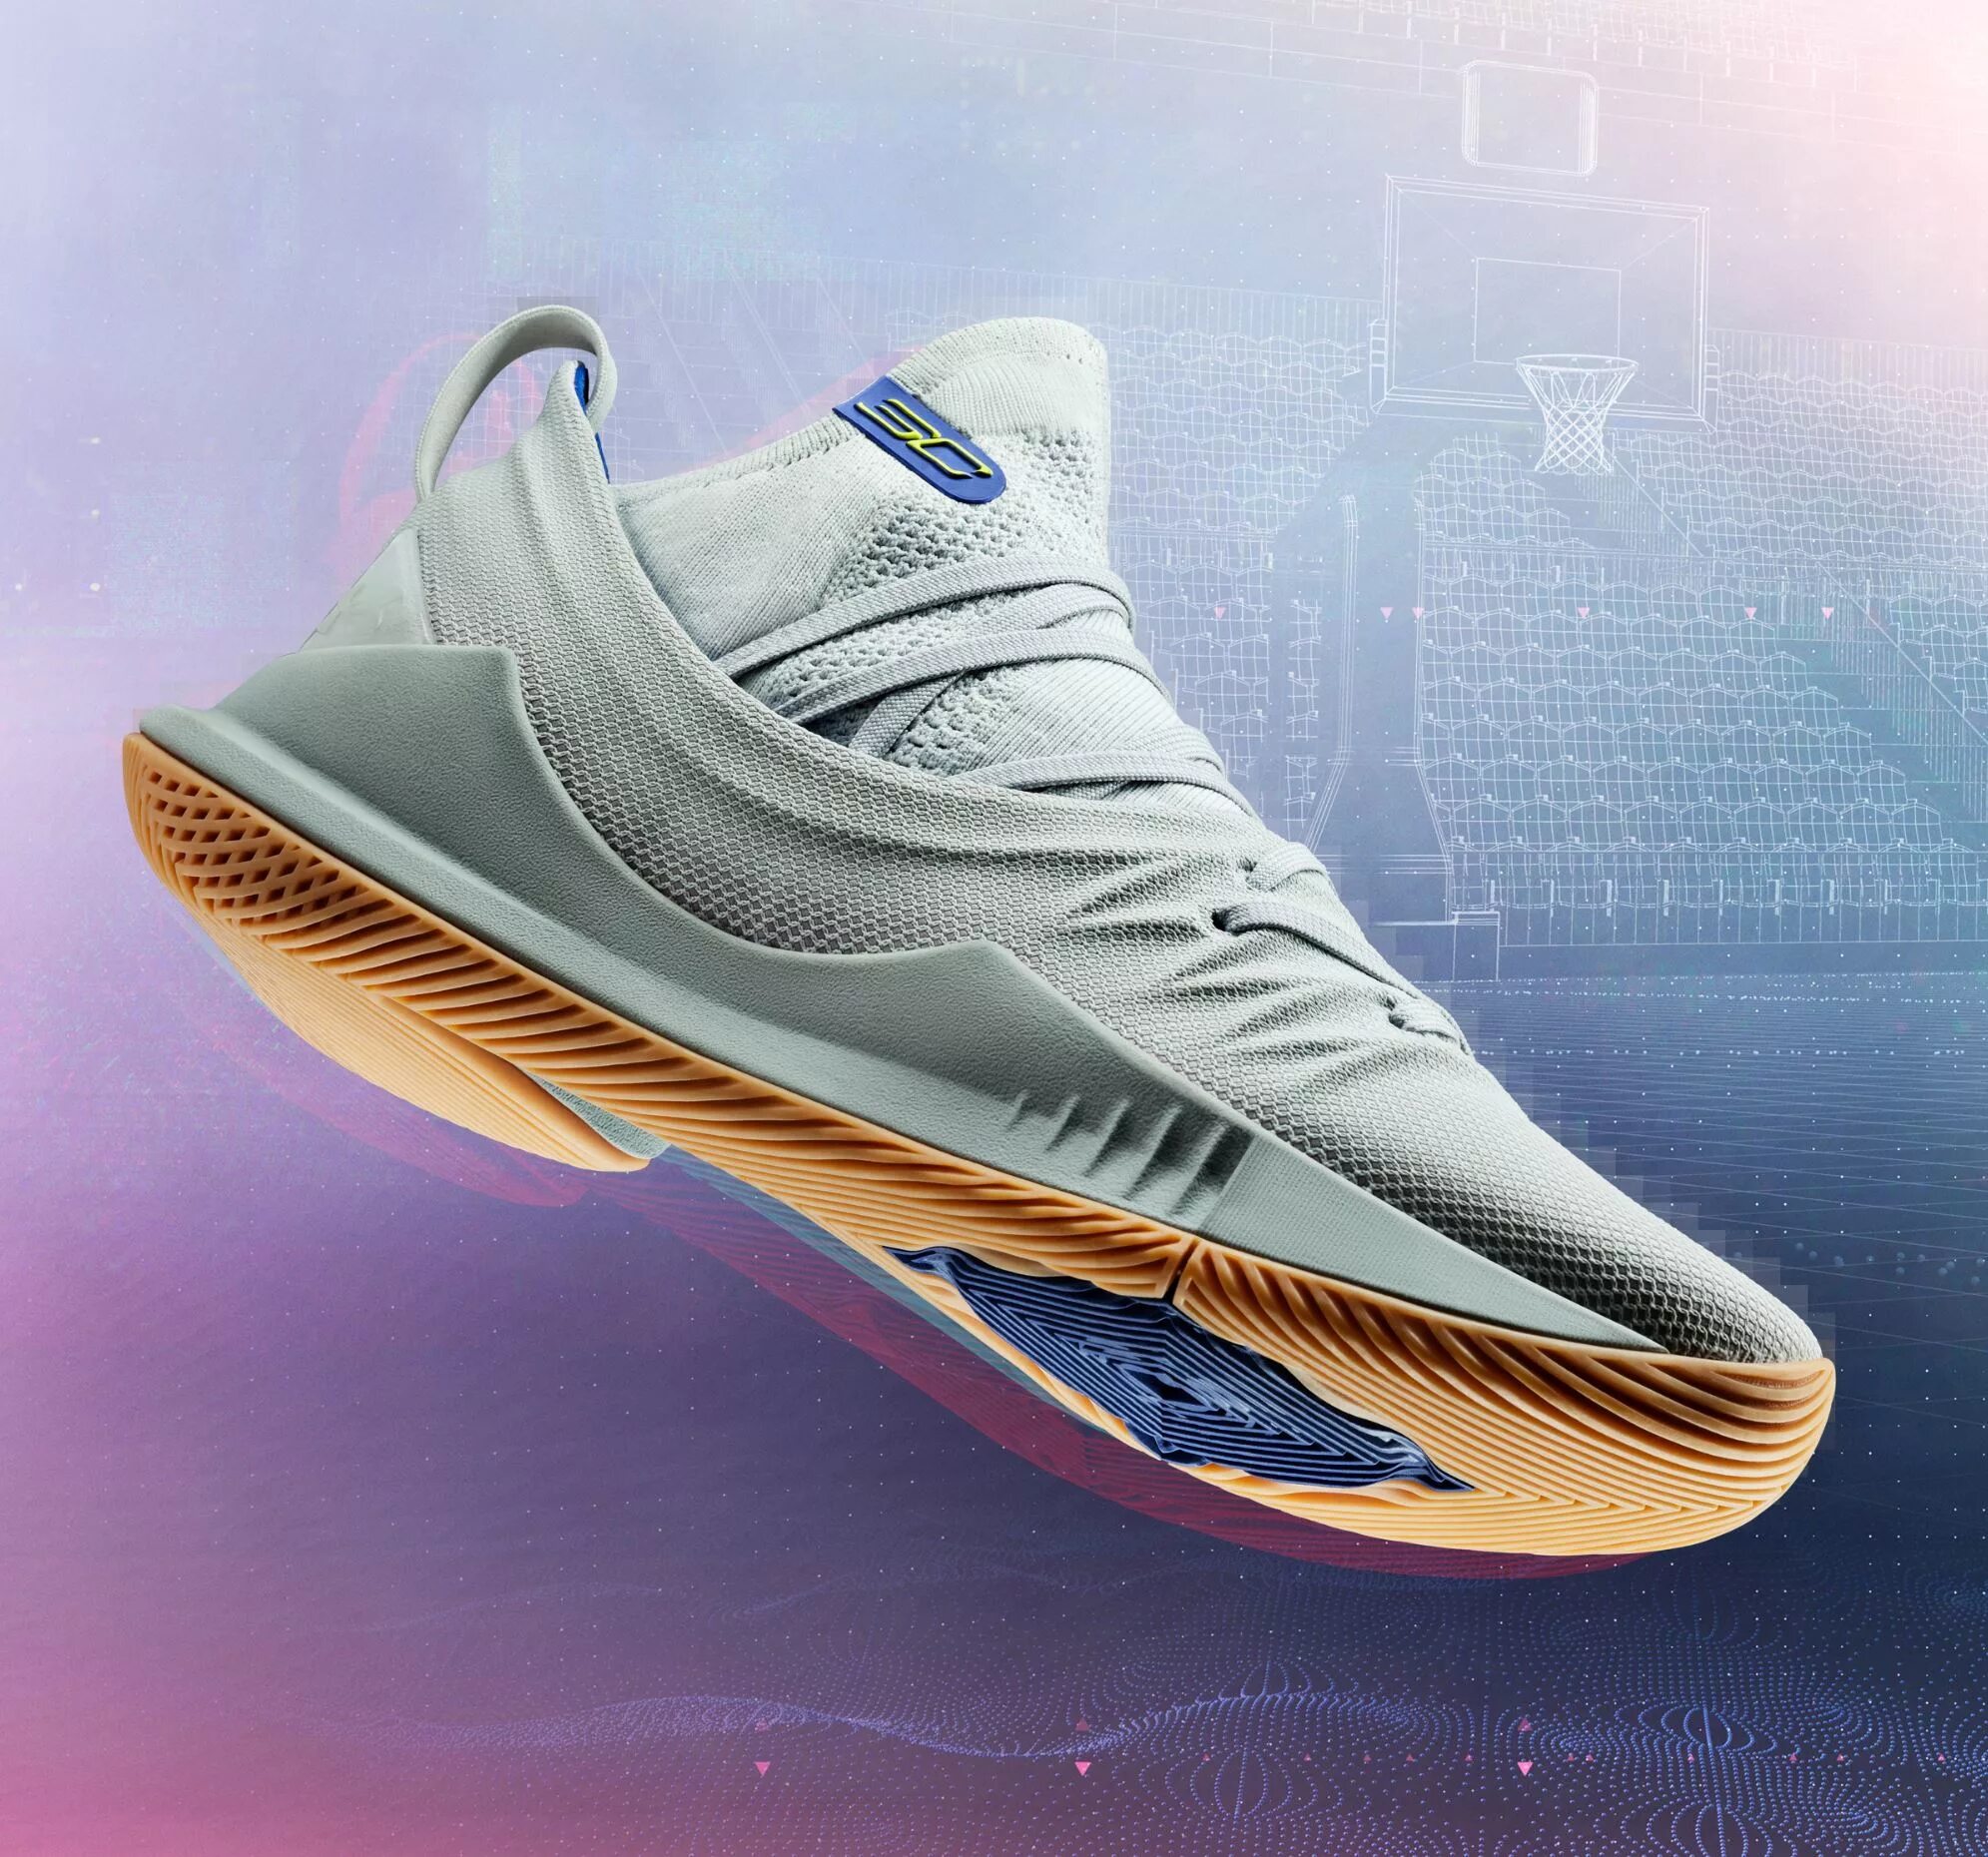 Карри 5. Curry 5. Under Armour Curry 5. Under Armour Curry 5 серые. Карри лоф 5 кроссовки.